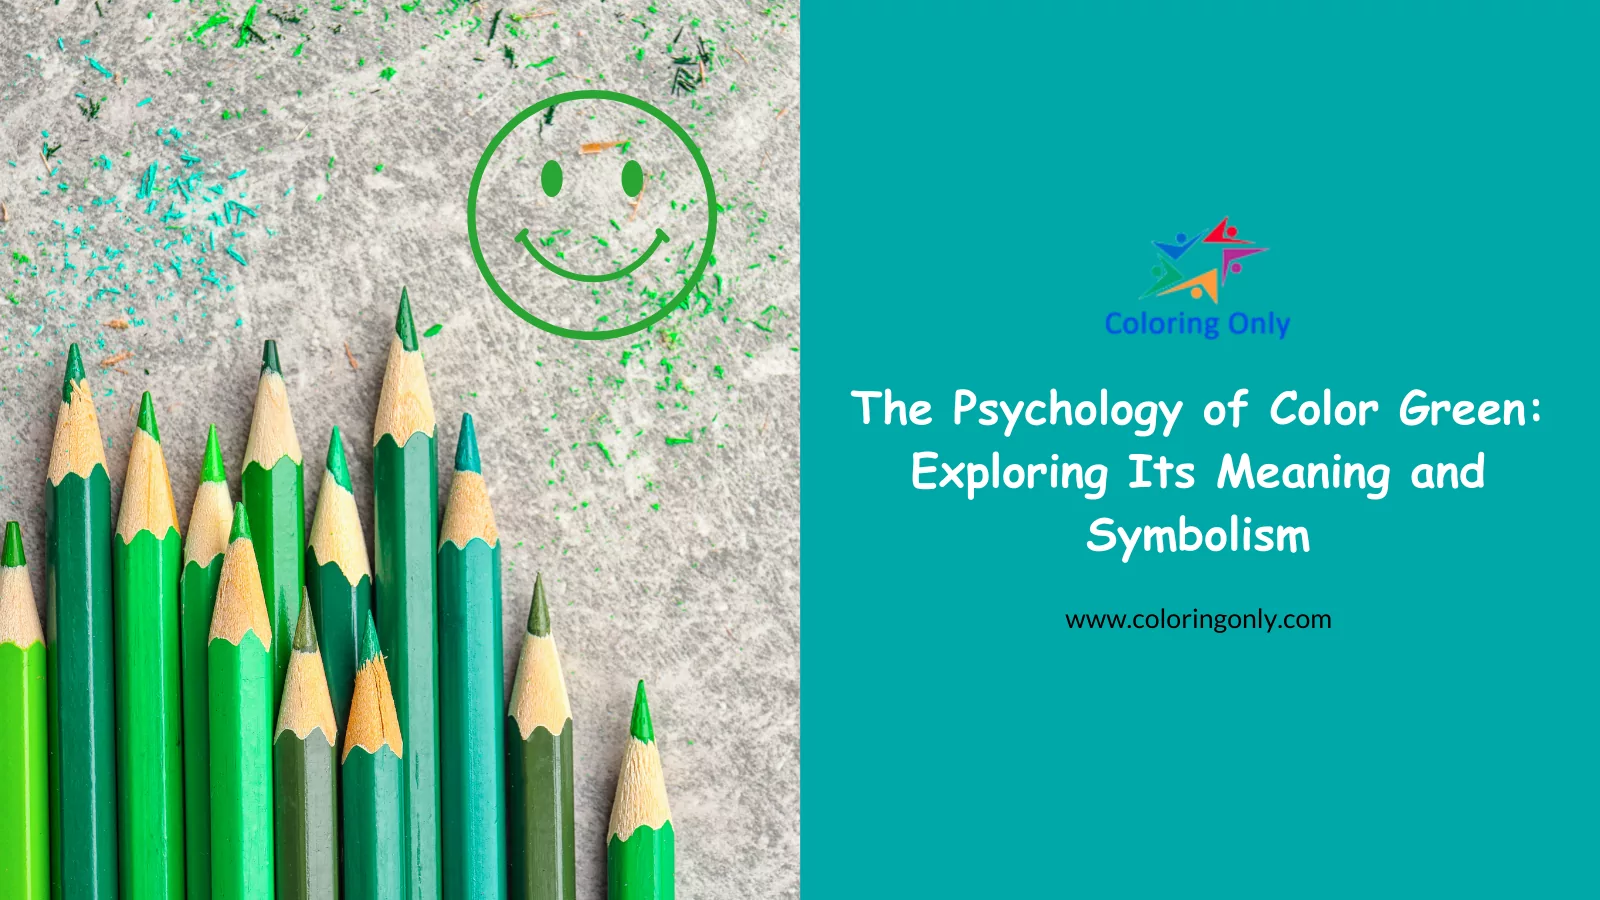 The Psychology of Color Green: Exploring Its Meaning and Symbolism